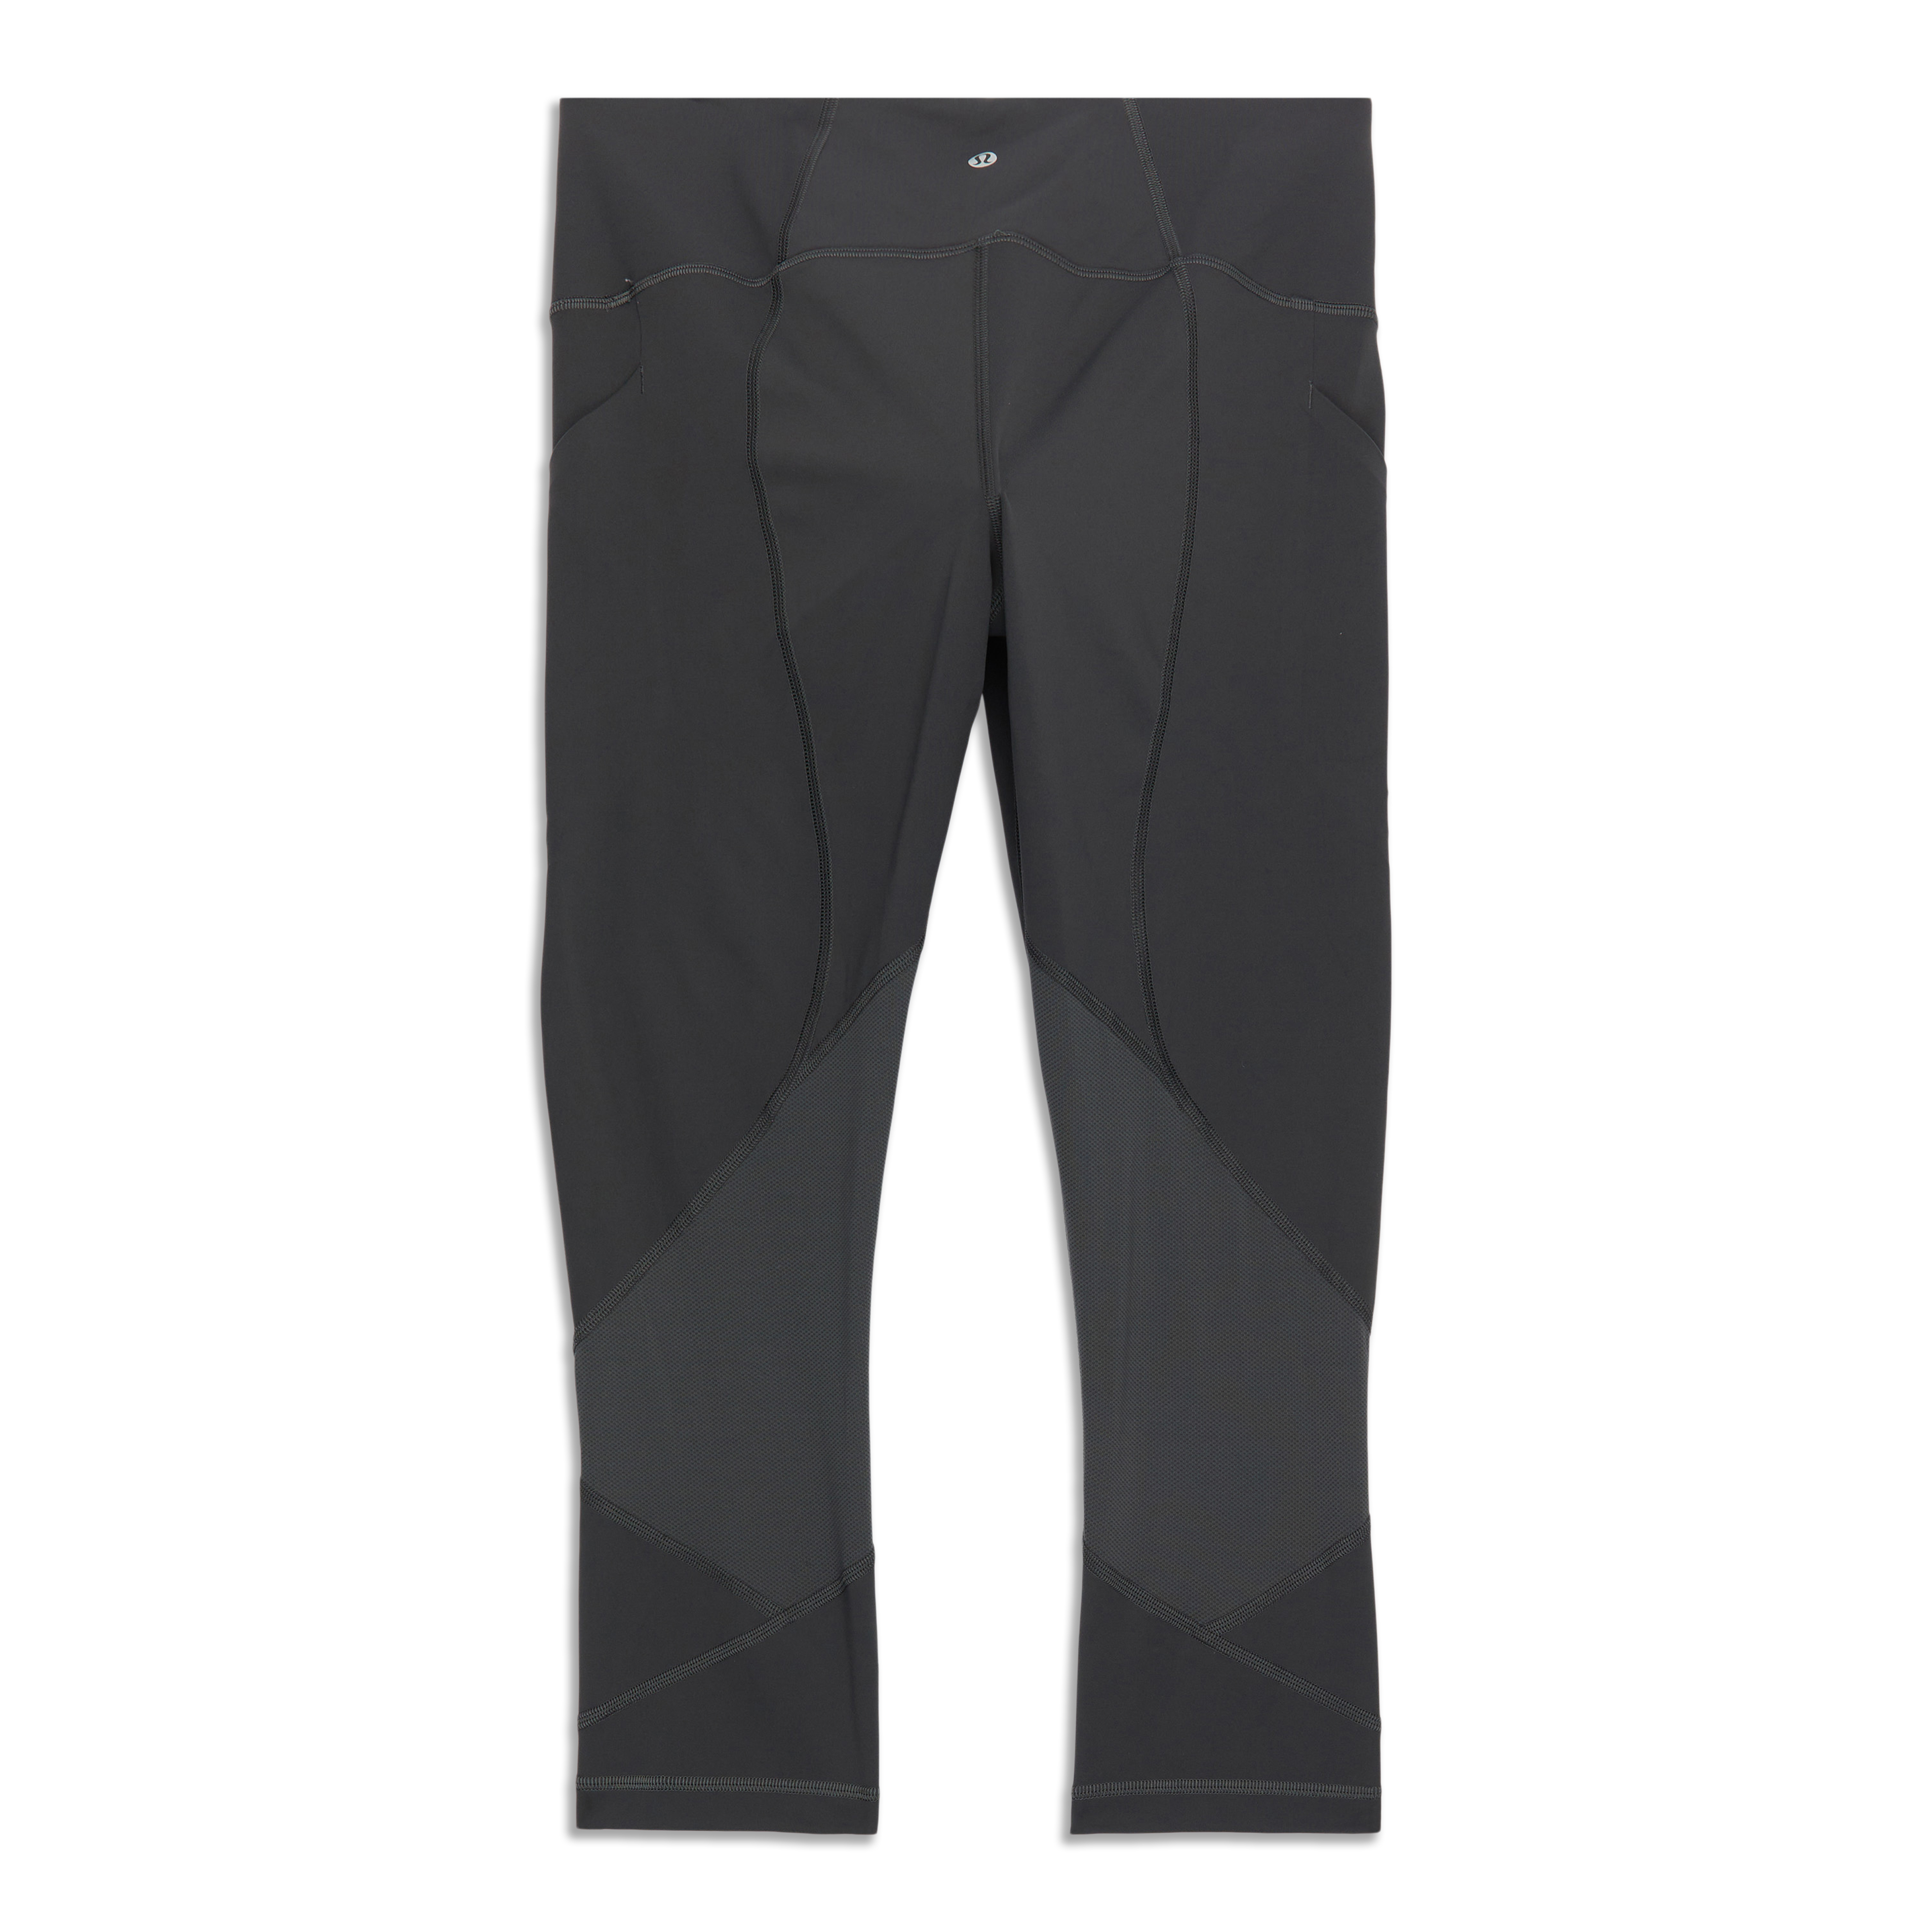 Lululemon Pace Rival Crop *22 in Black Size 6 - $44 (51% Off Retail) -  From Megan